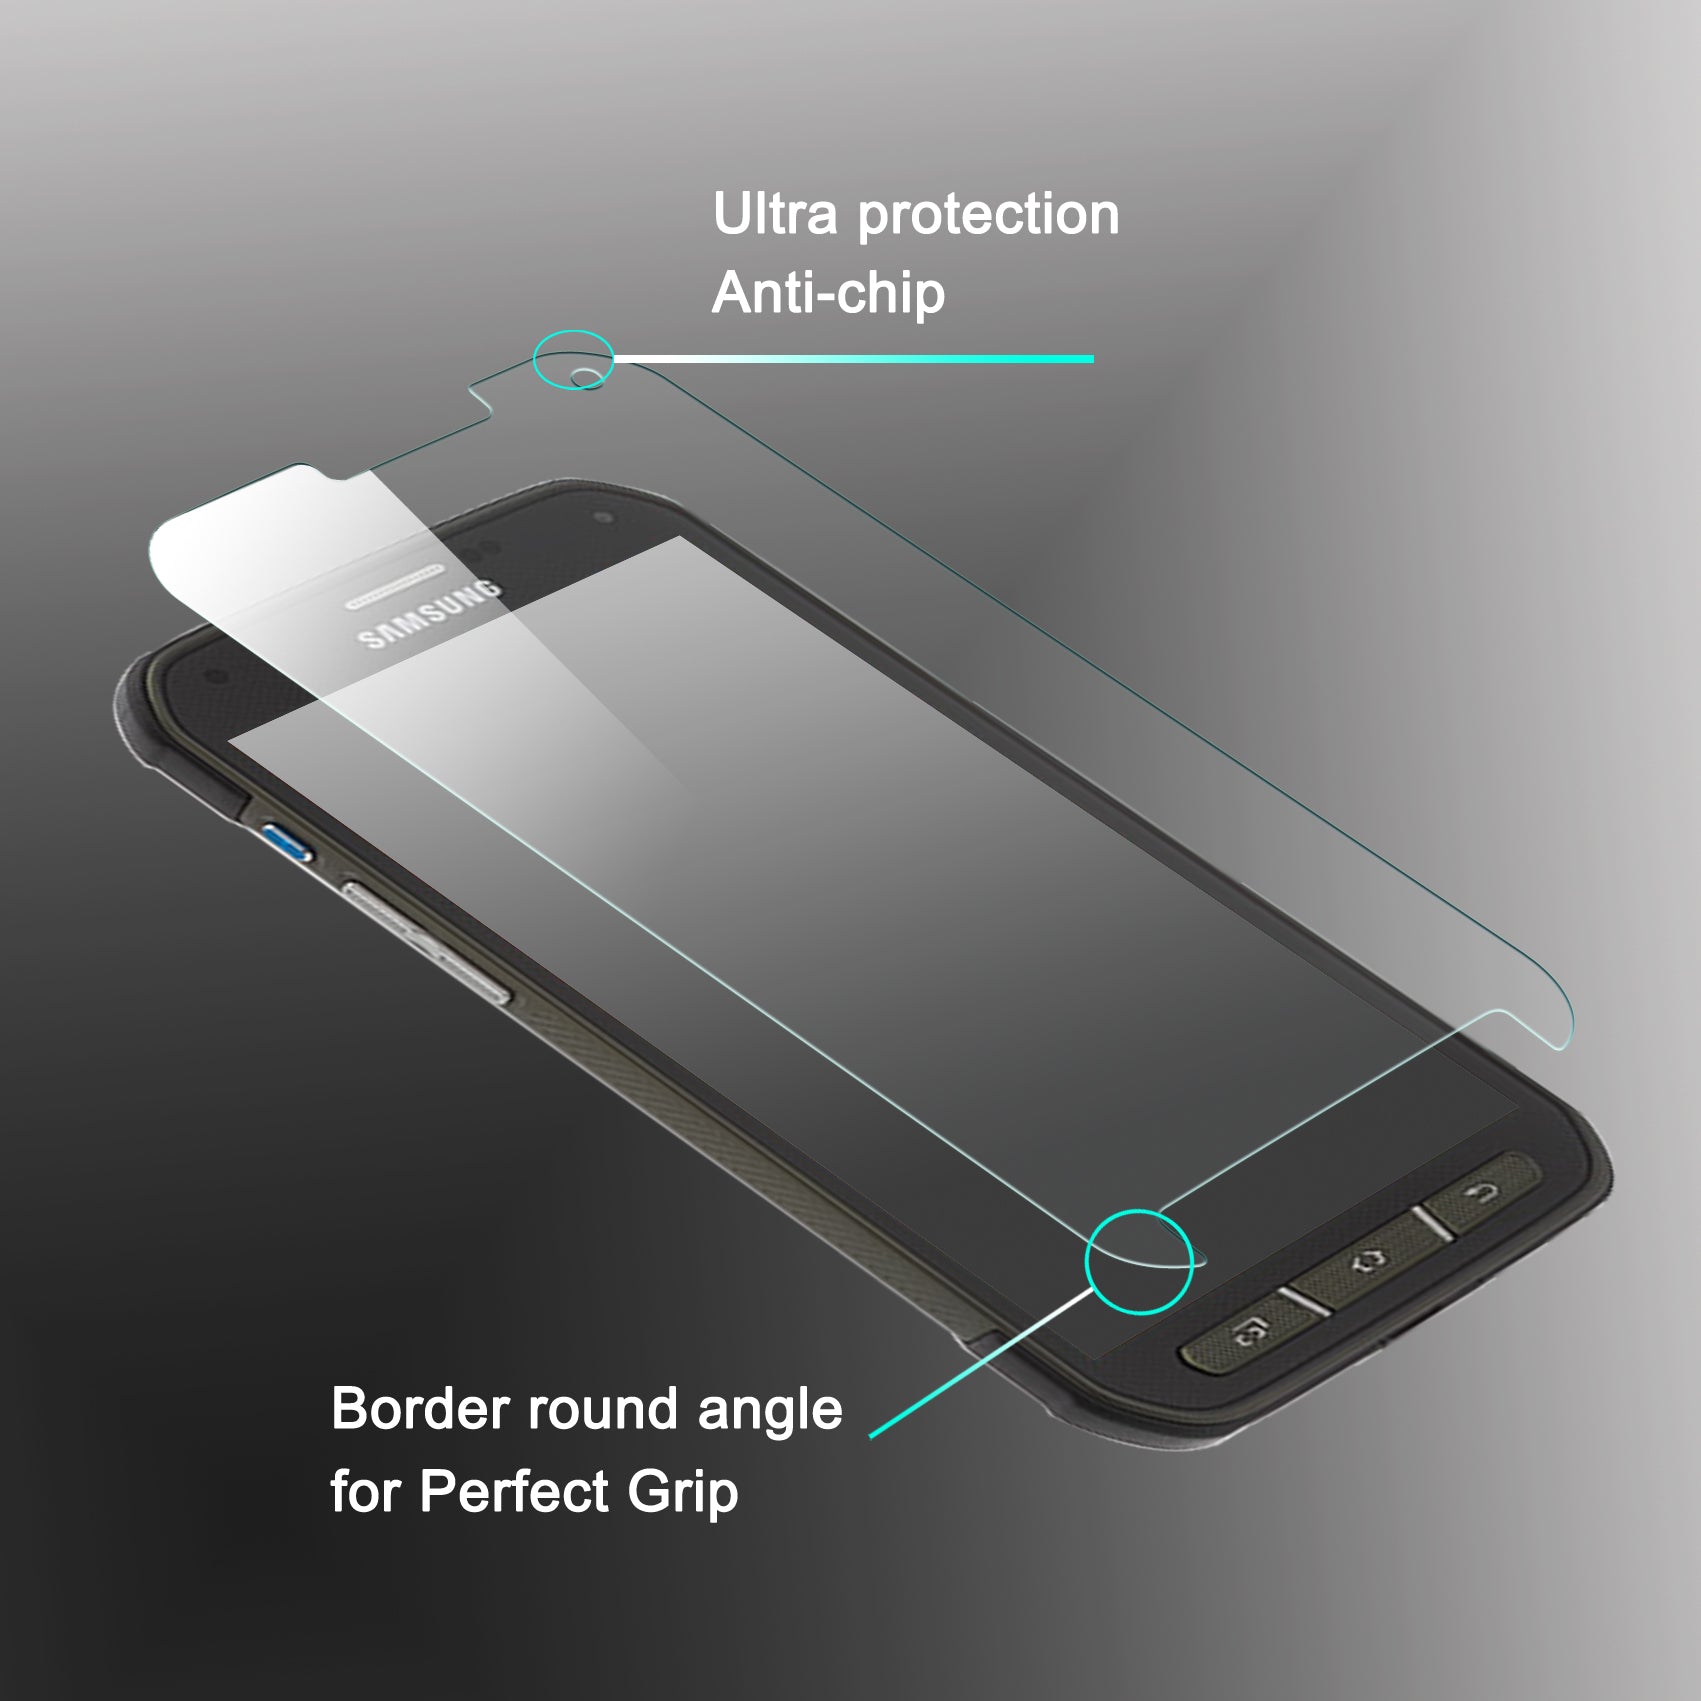 LUVVITT Tempered Glass Screen Protector for Galaxy S5 ACTIVE - Clear